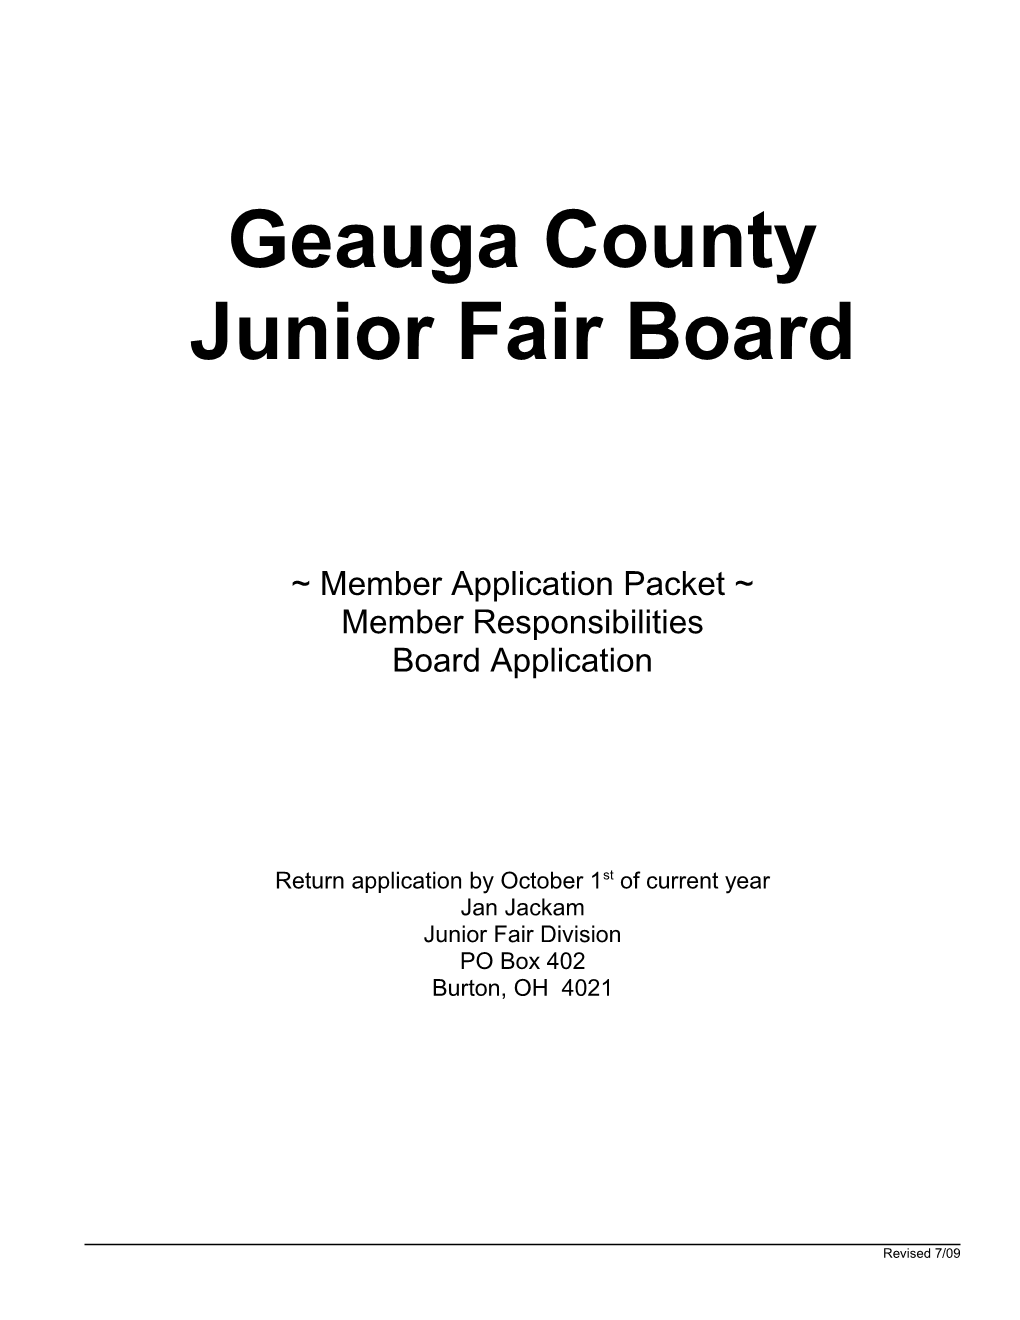 Geauga County Junior Fair King and Queen Resume Form